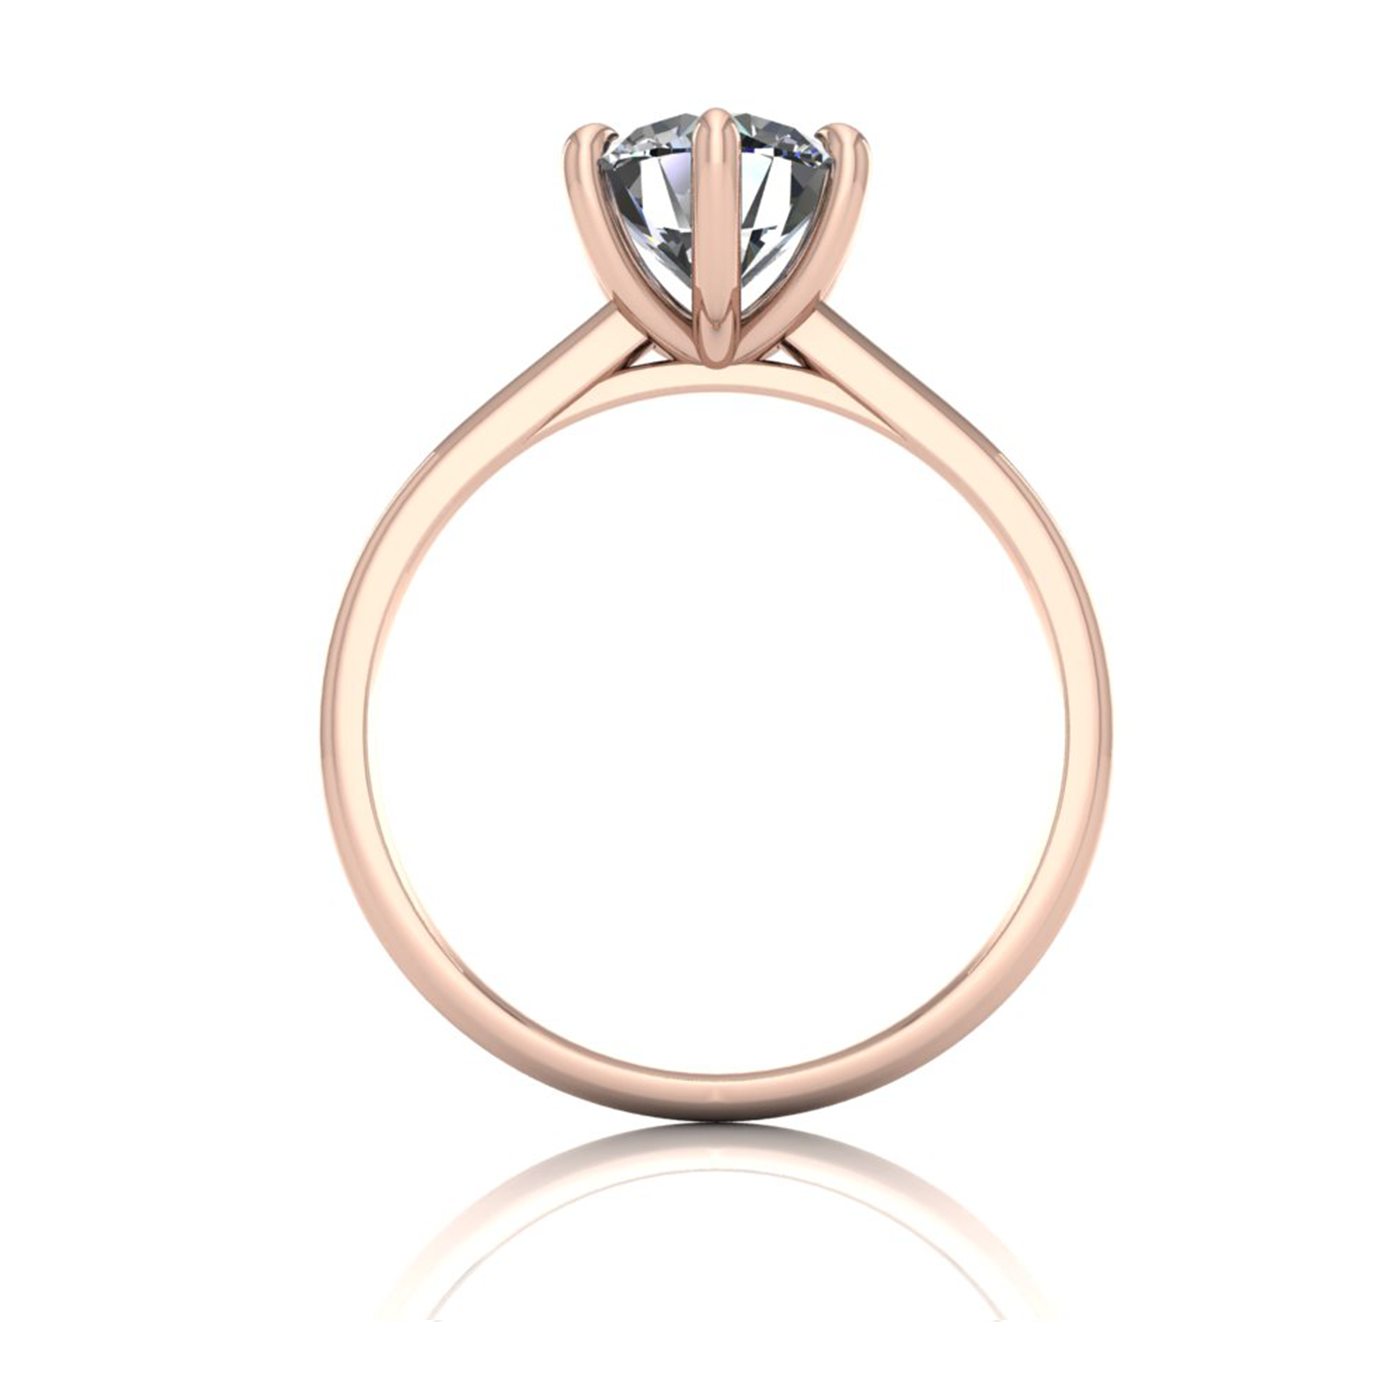 18k rose gold 1,50 ct 6 prongs solitaire round cut diamond engagement ring with whisper thin band